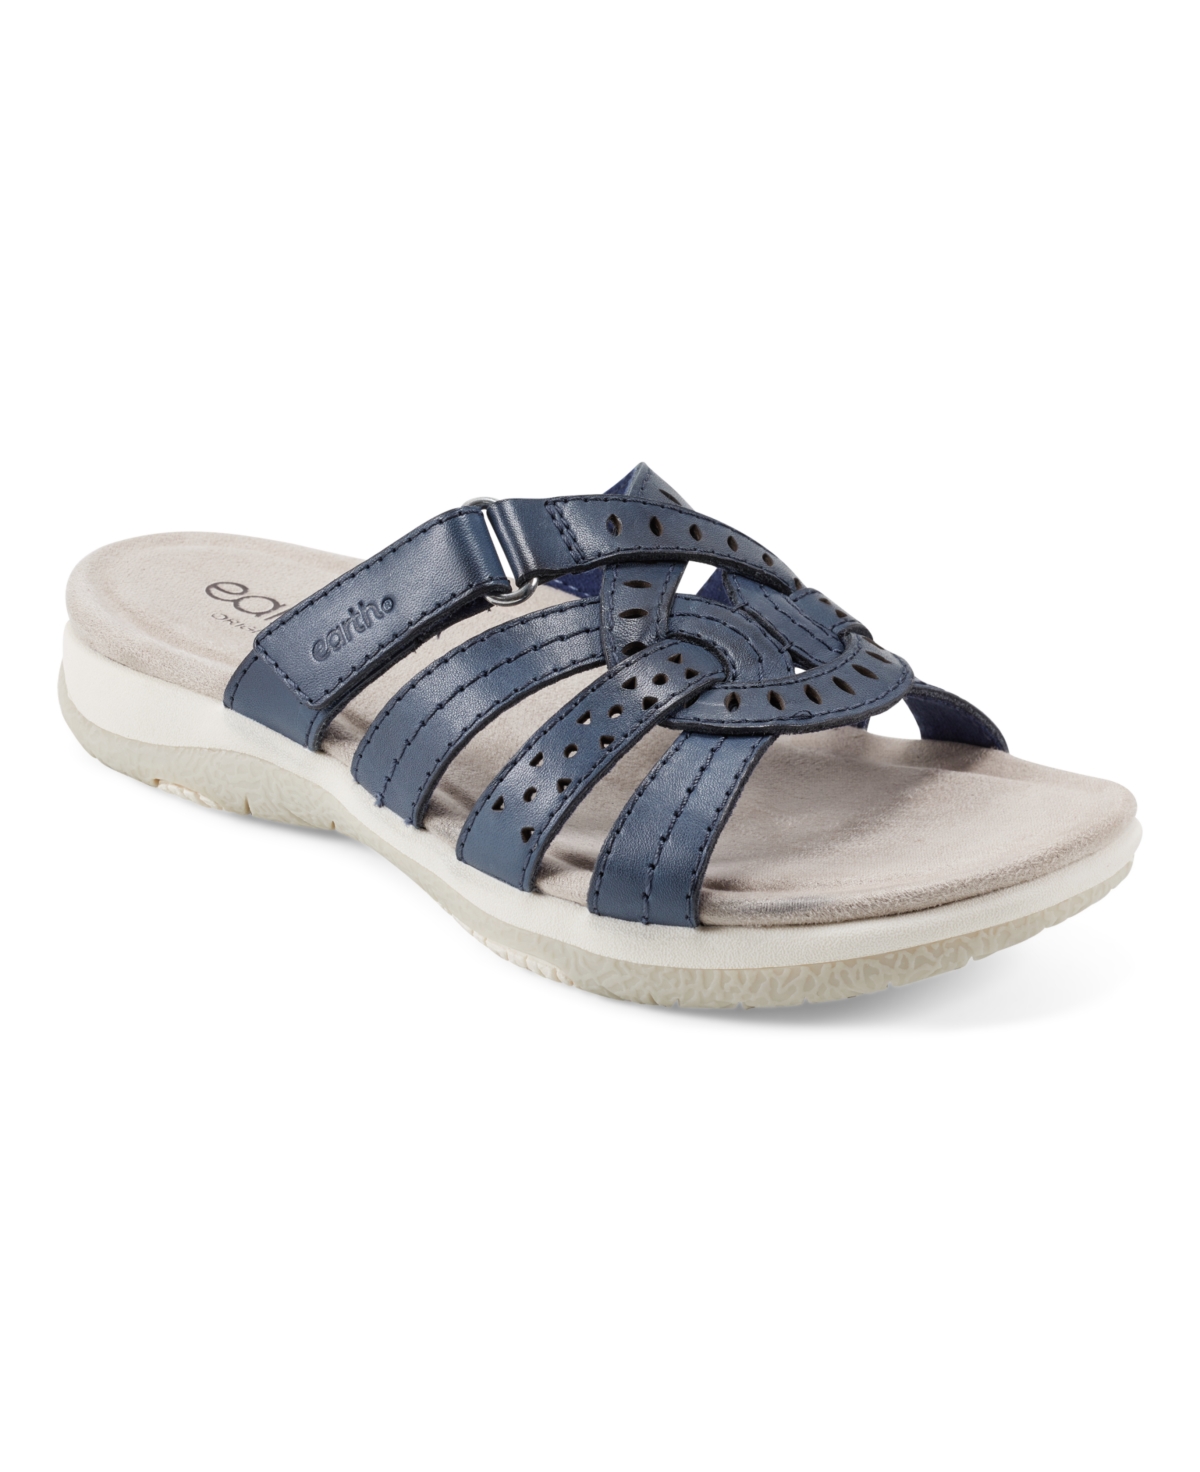 Earth Women's Sassoni Slip-On Strappy Casual Sandals - Navy Leather